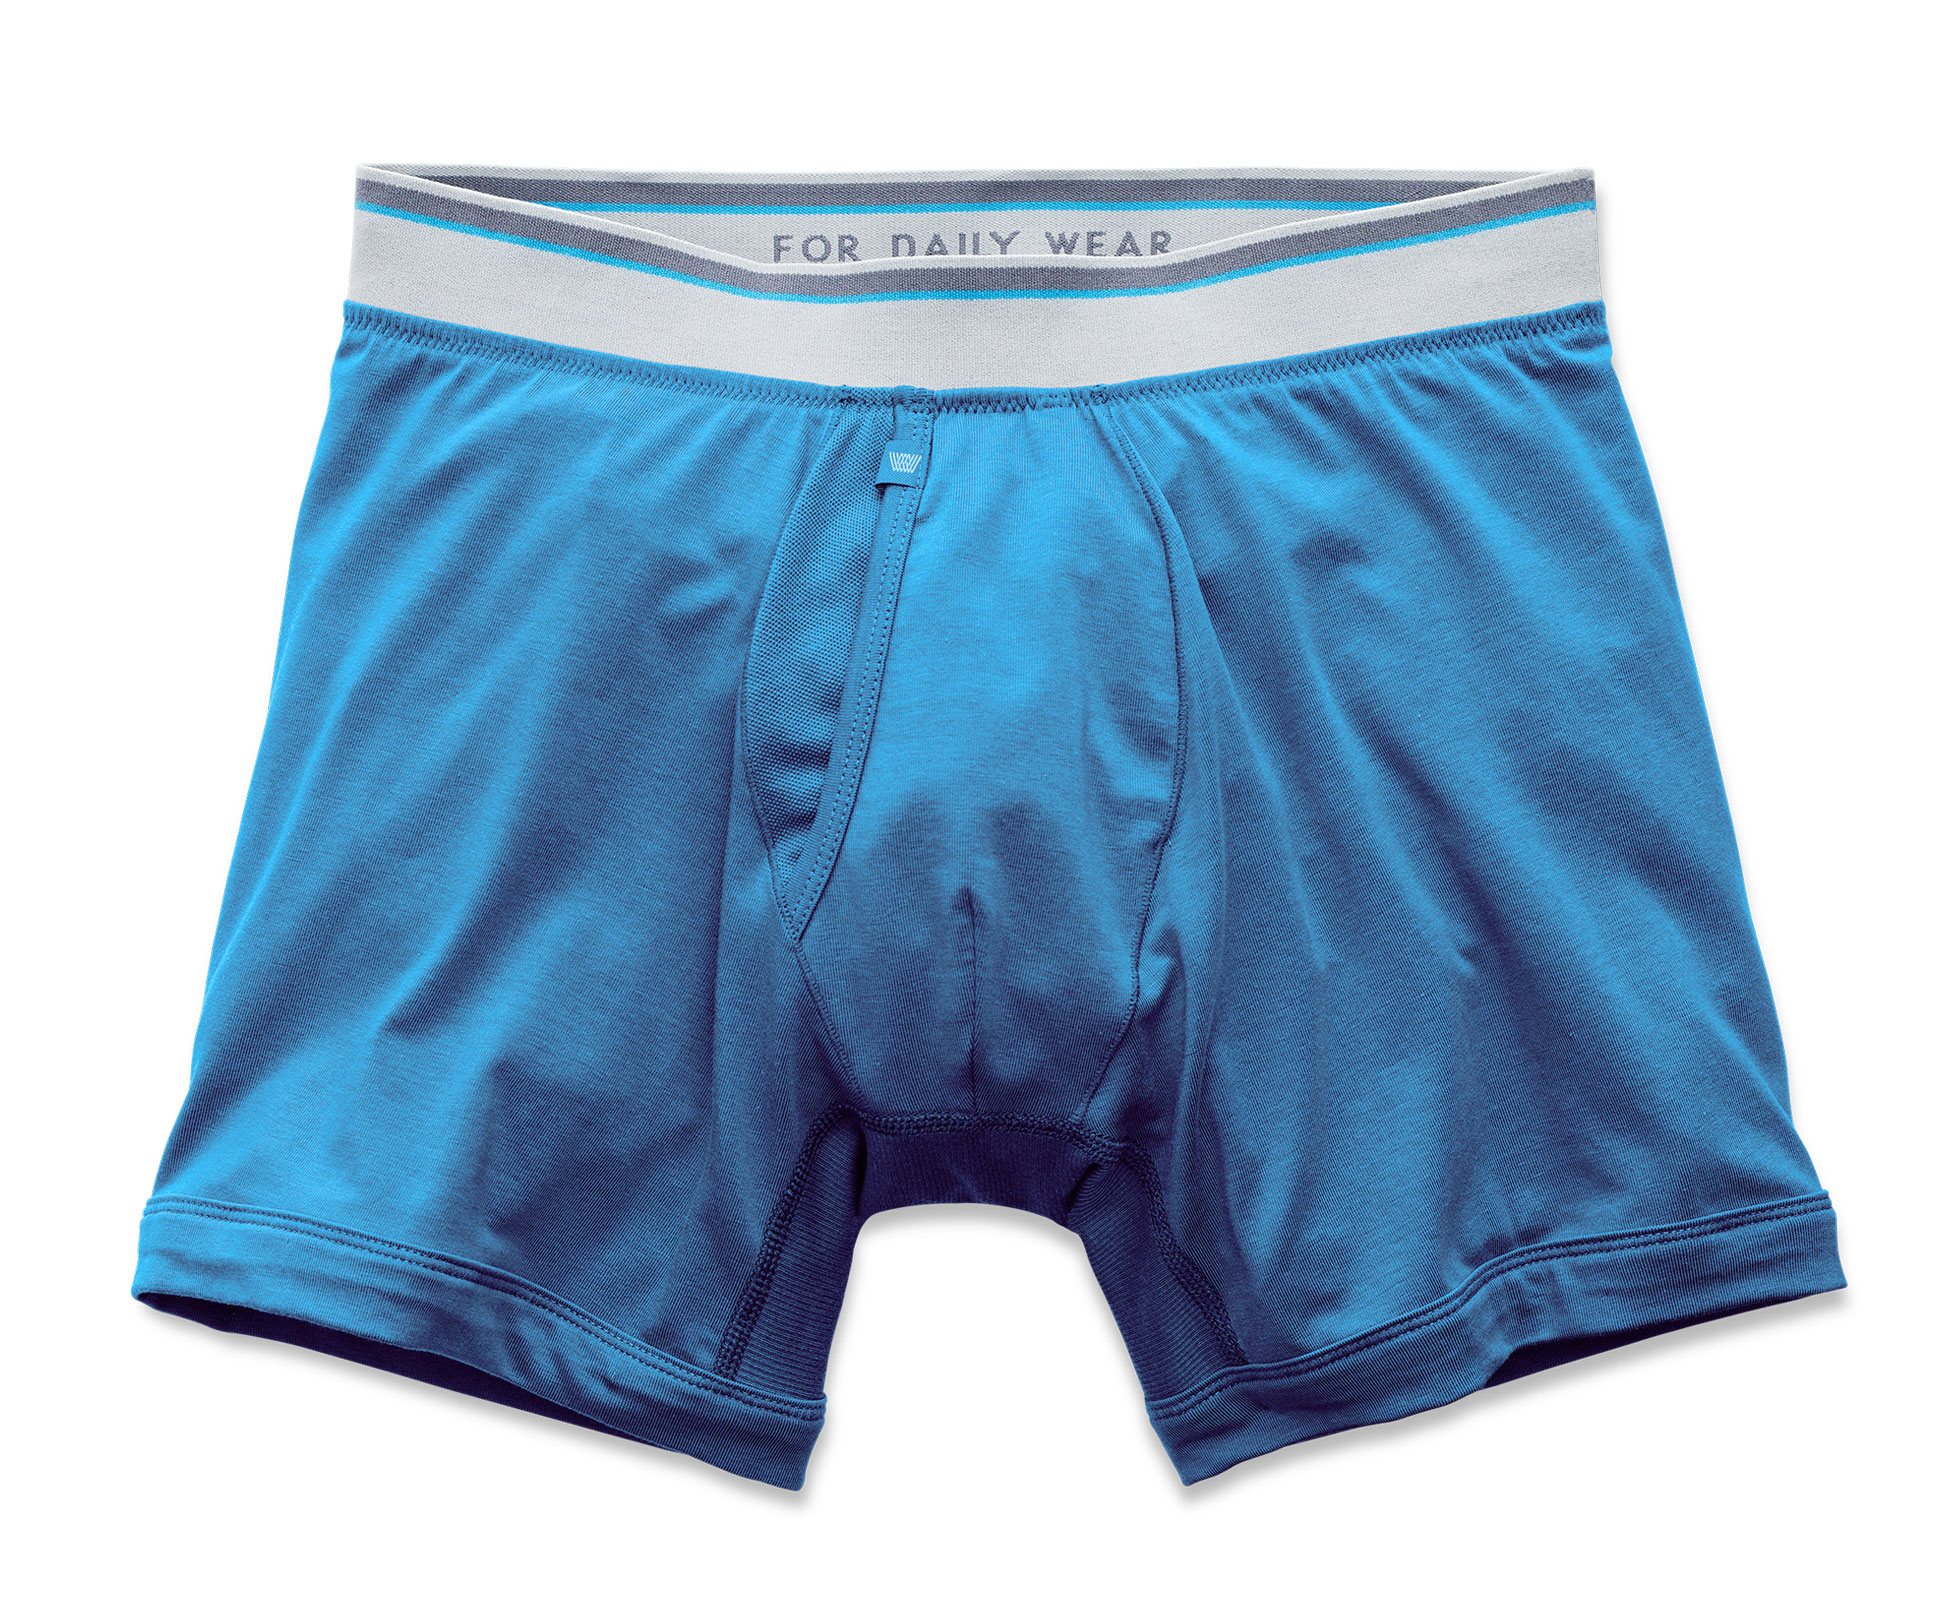 This GQ Insiders Favorite Underwear Are Mack Weldon. Here's Why